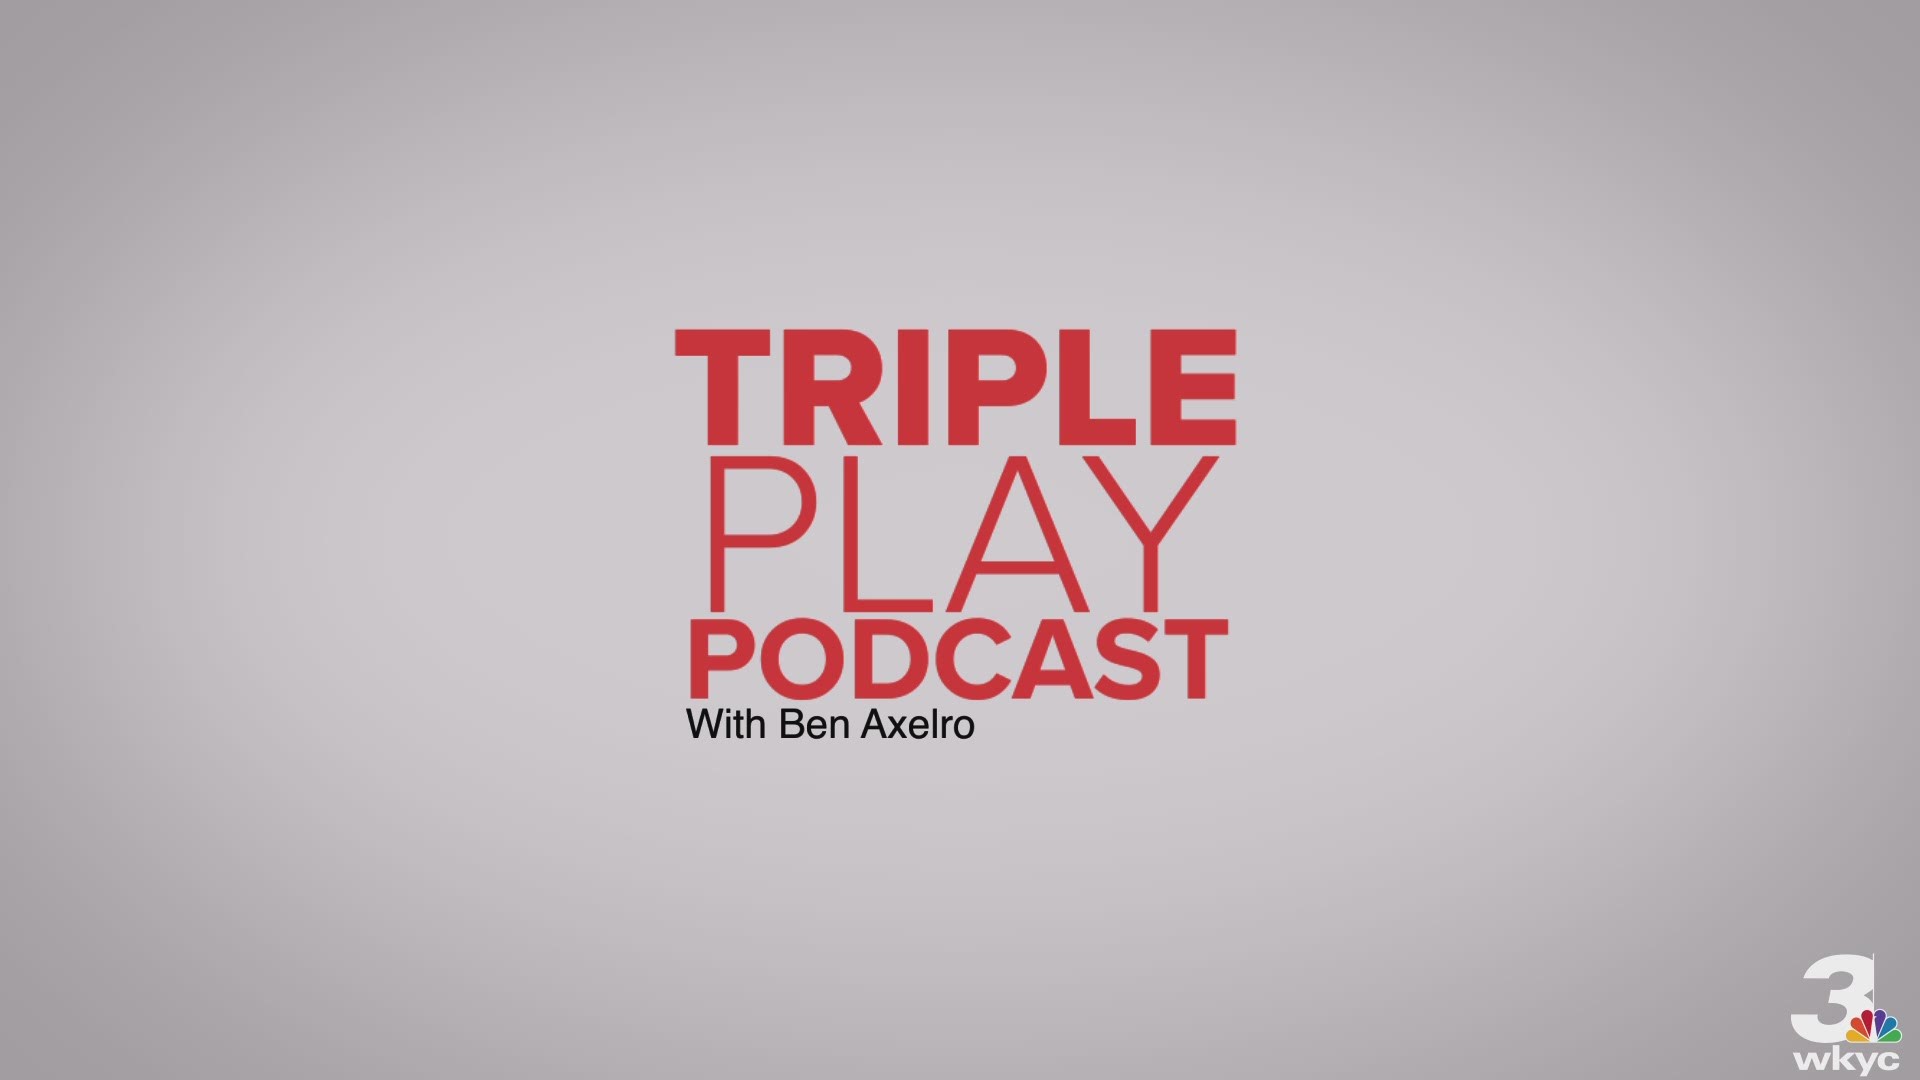 Triple Play Podcast with Ben Axelrod and Bud Shaw